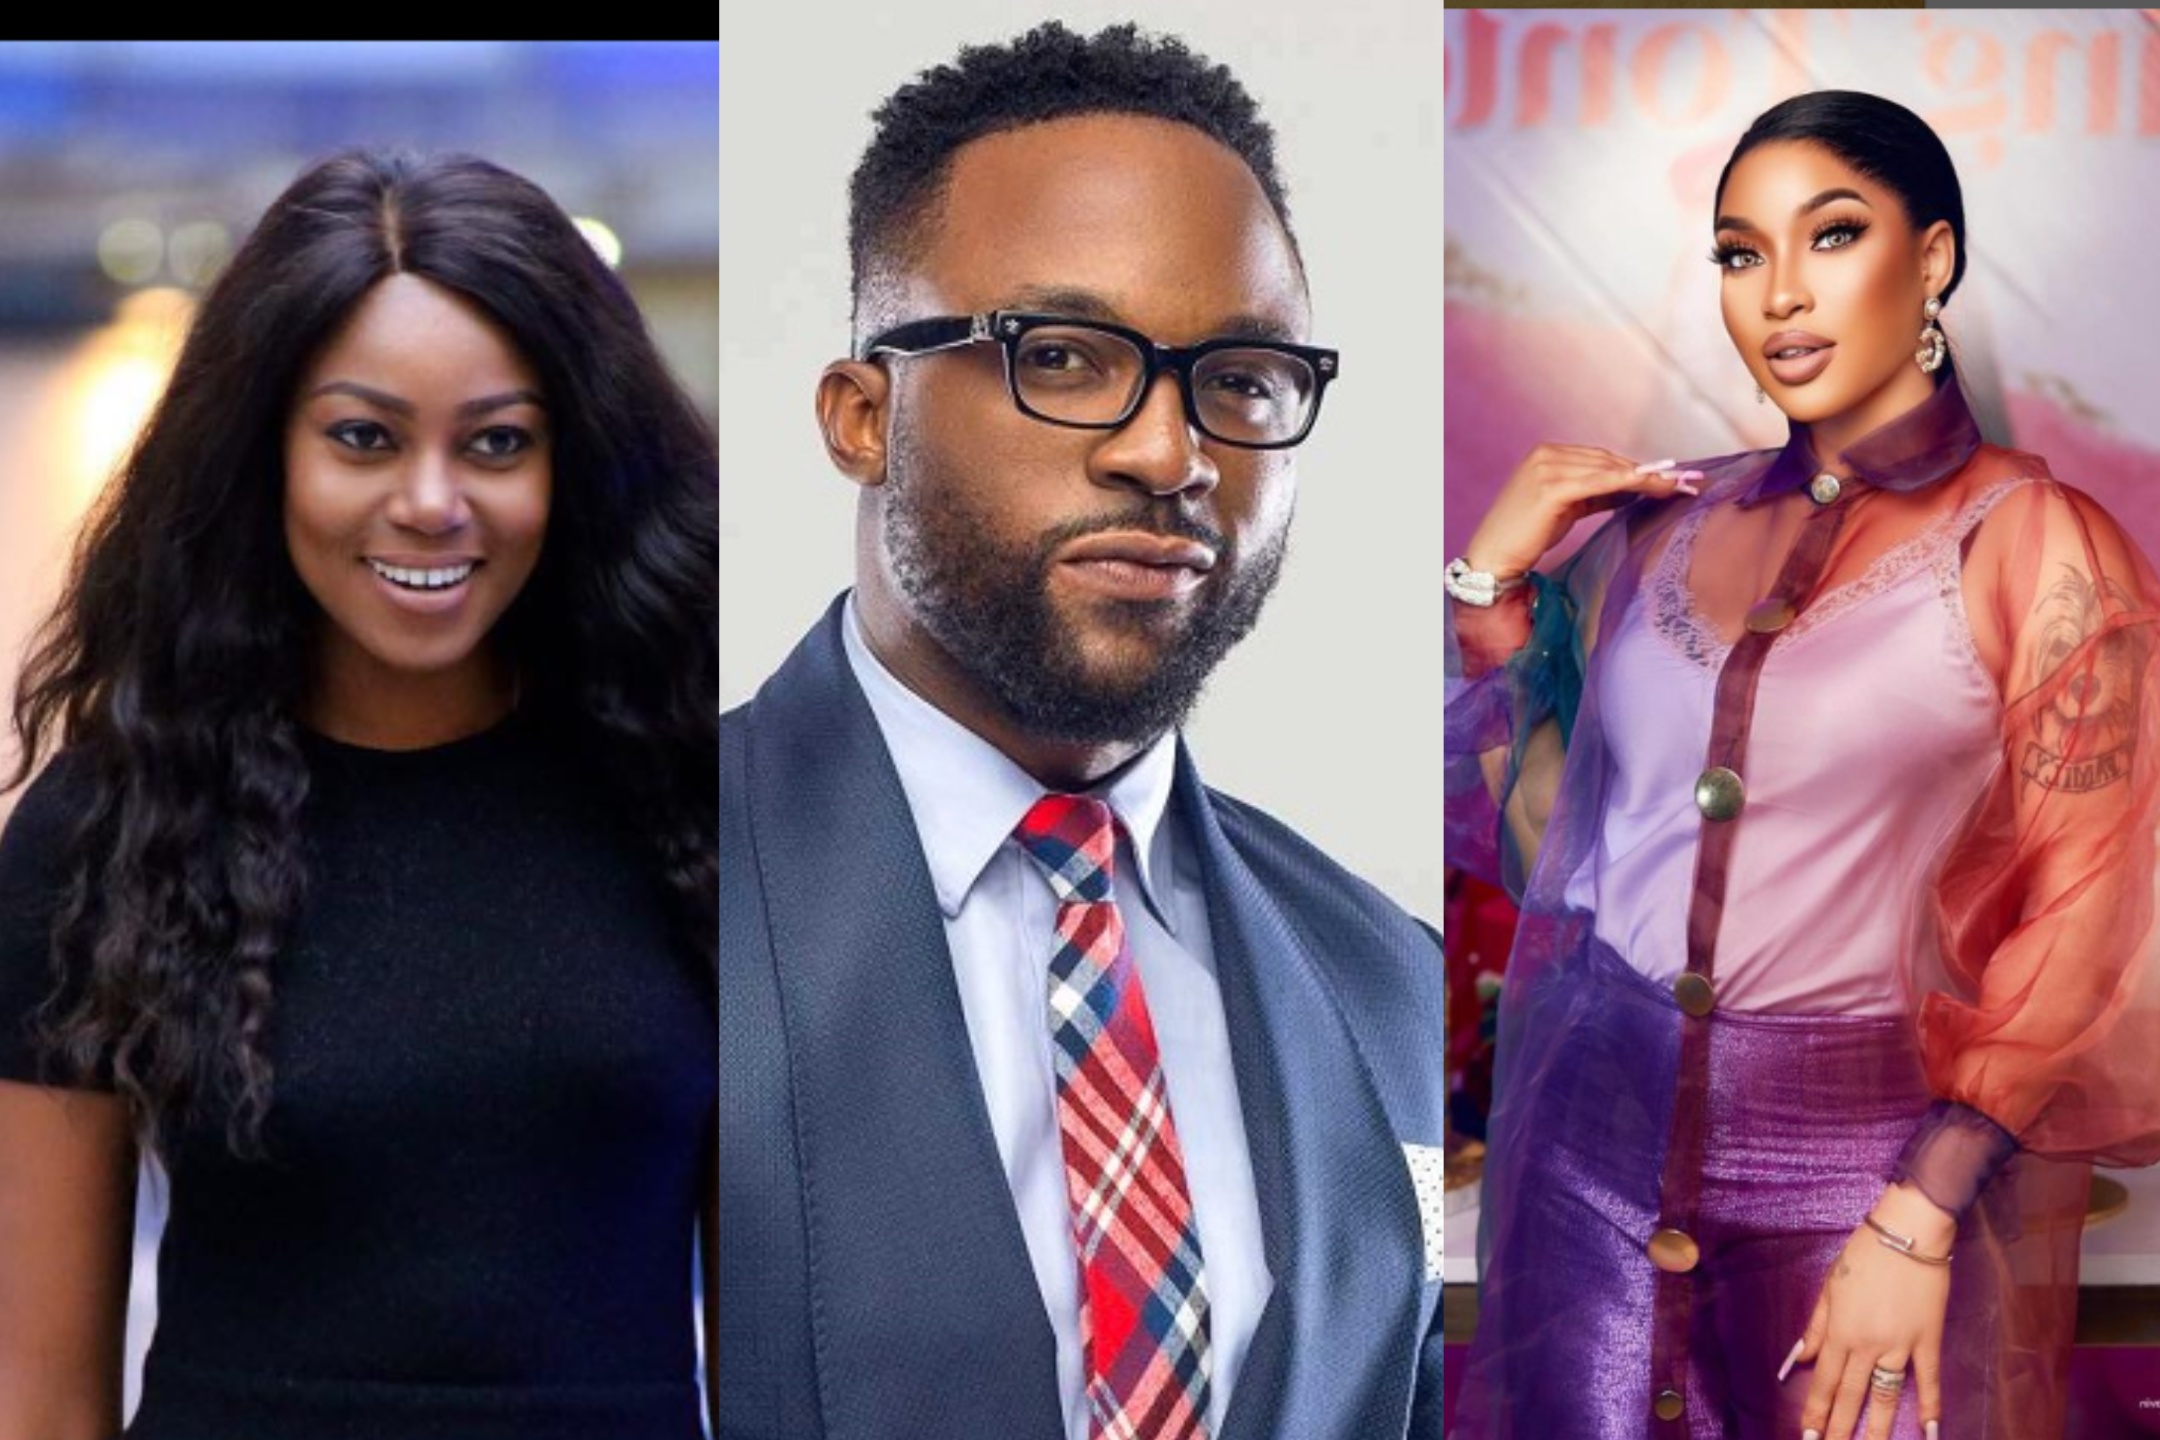 Make Tonto No catch you oh My hand no Dey” – Iyanya challenges Yvonne Nelson